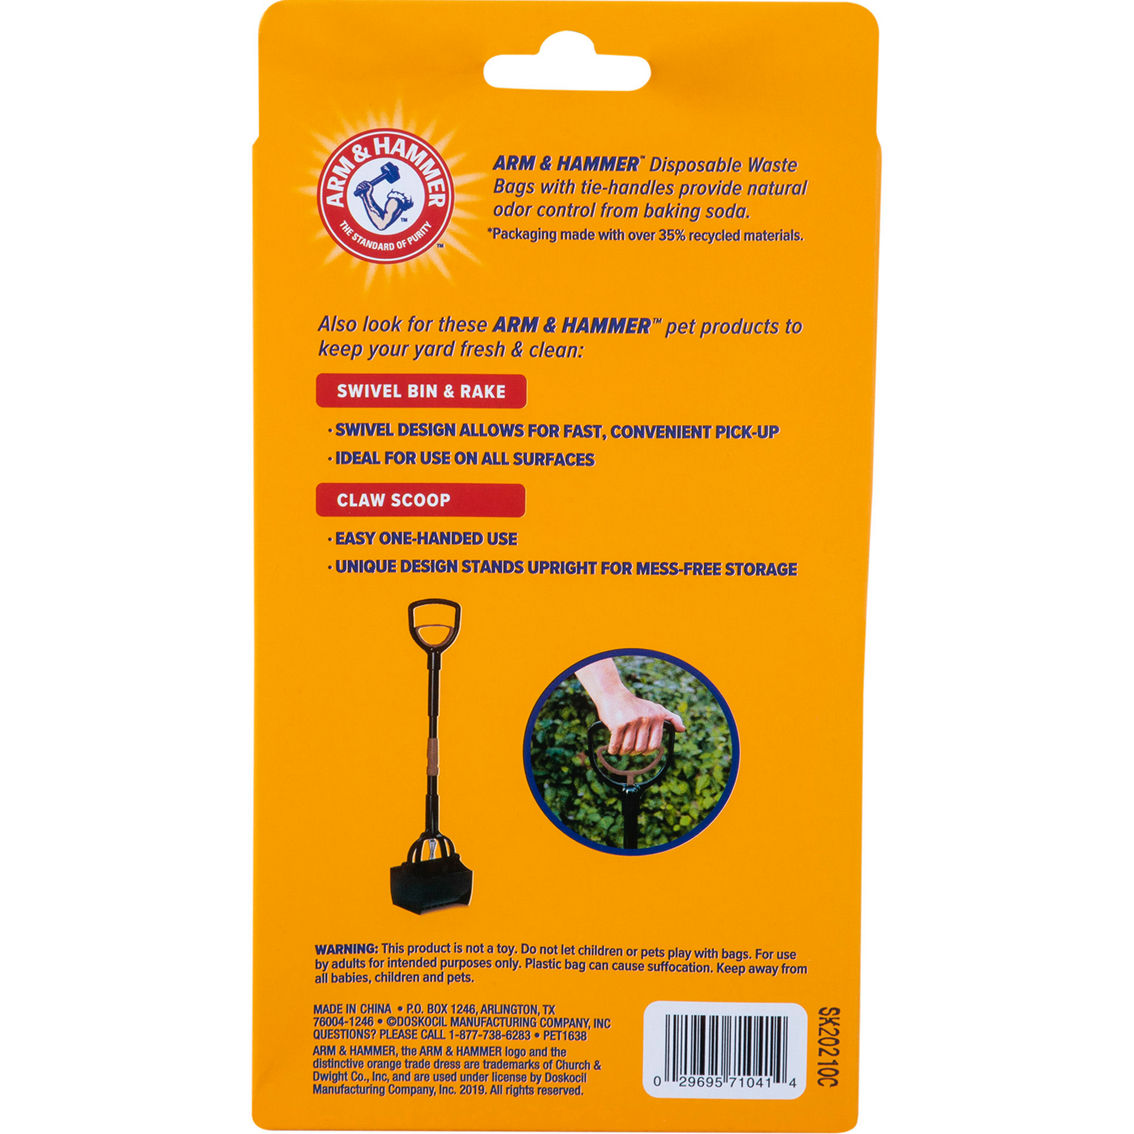 Petmate Arm & Hammer Easy Tie Dog Waste Bags 75 ct. - Image 2 of 5